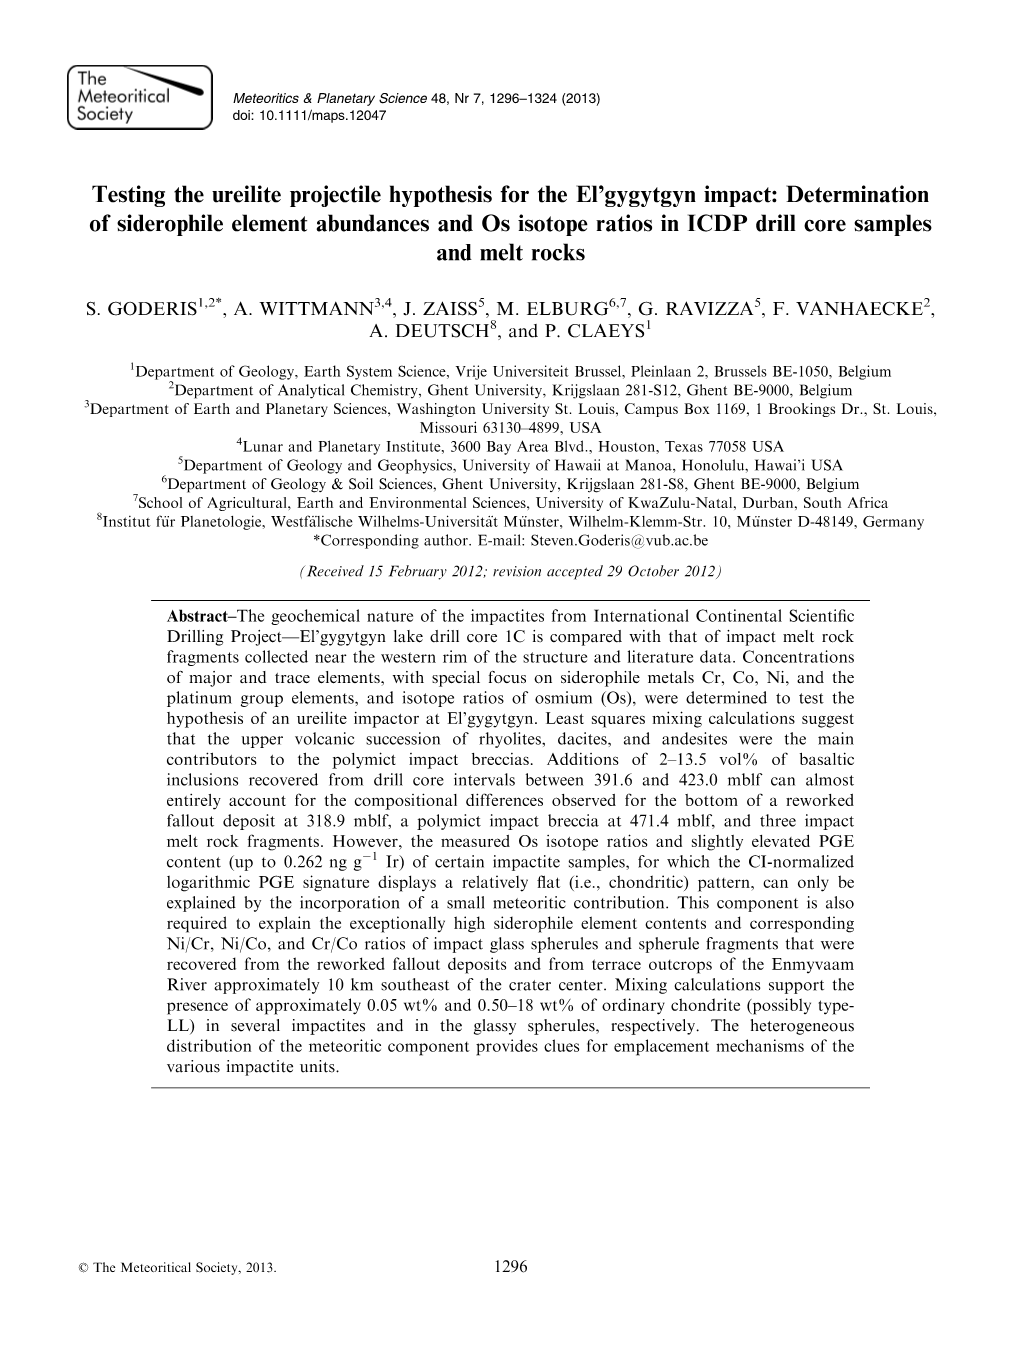 Testing the Ureilite Projectile Hypothesis for the Elgygytgyn Impact: Determination of Siderophile Element Abundances and Os